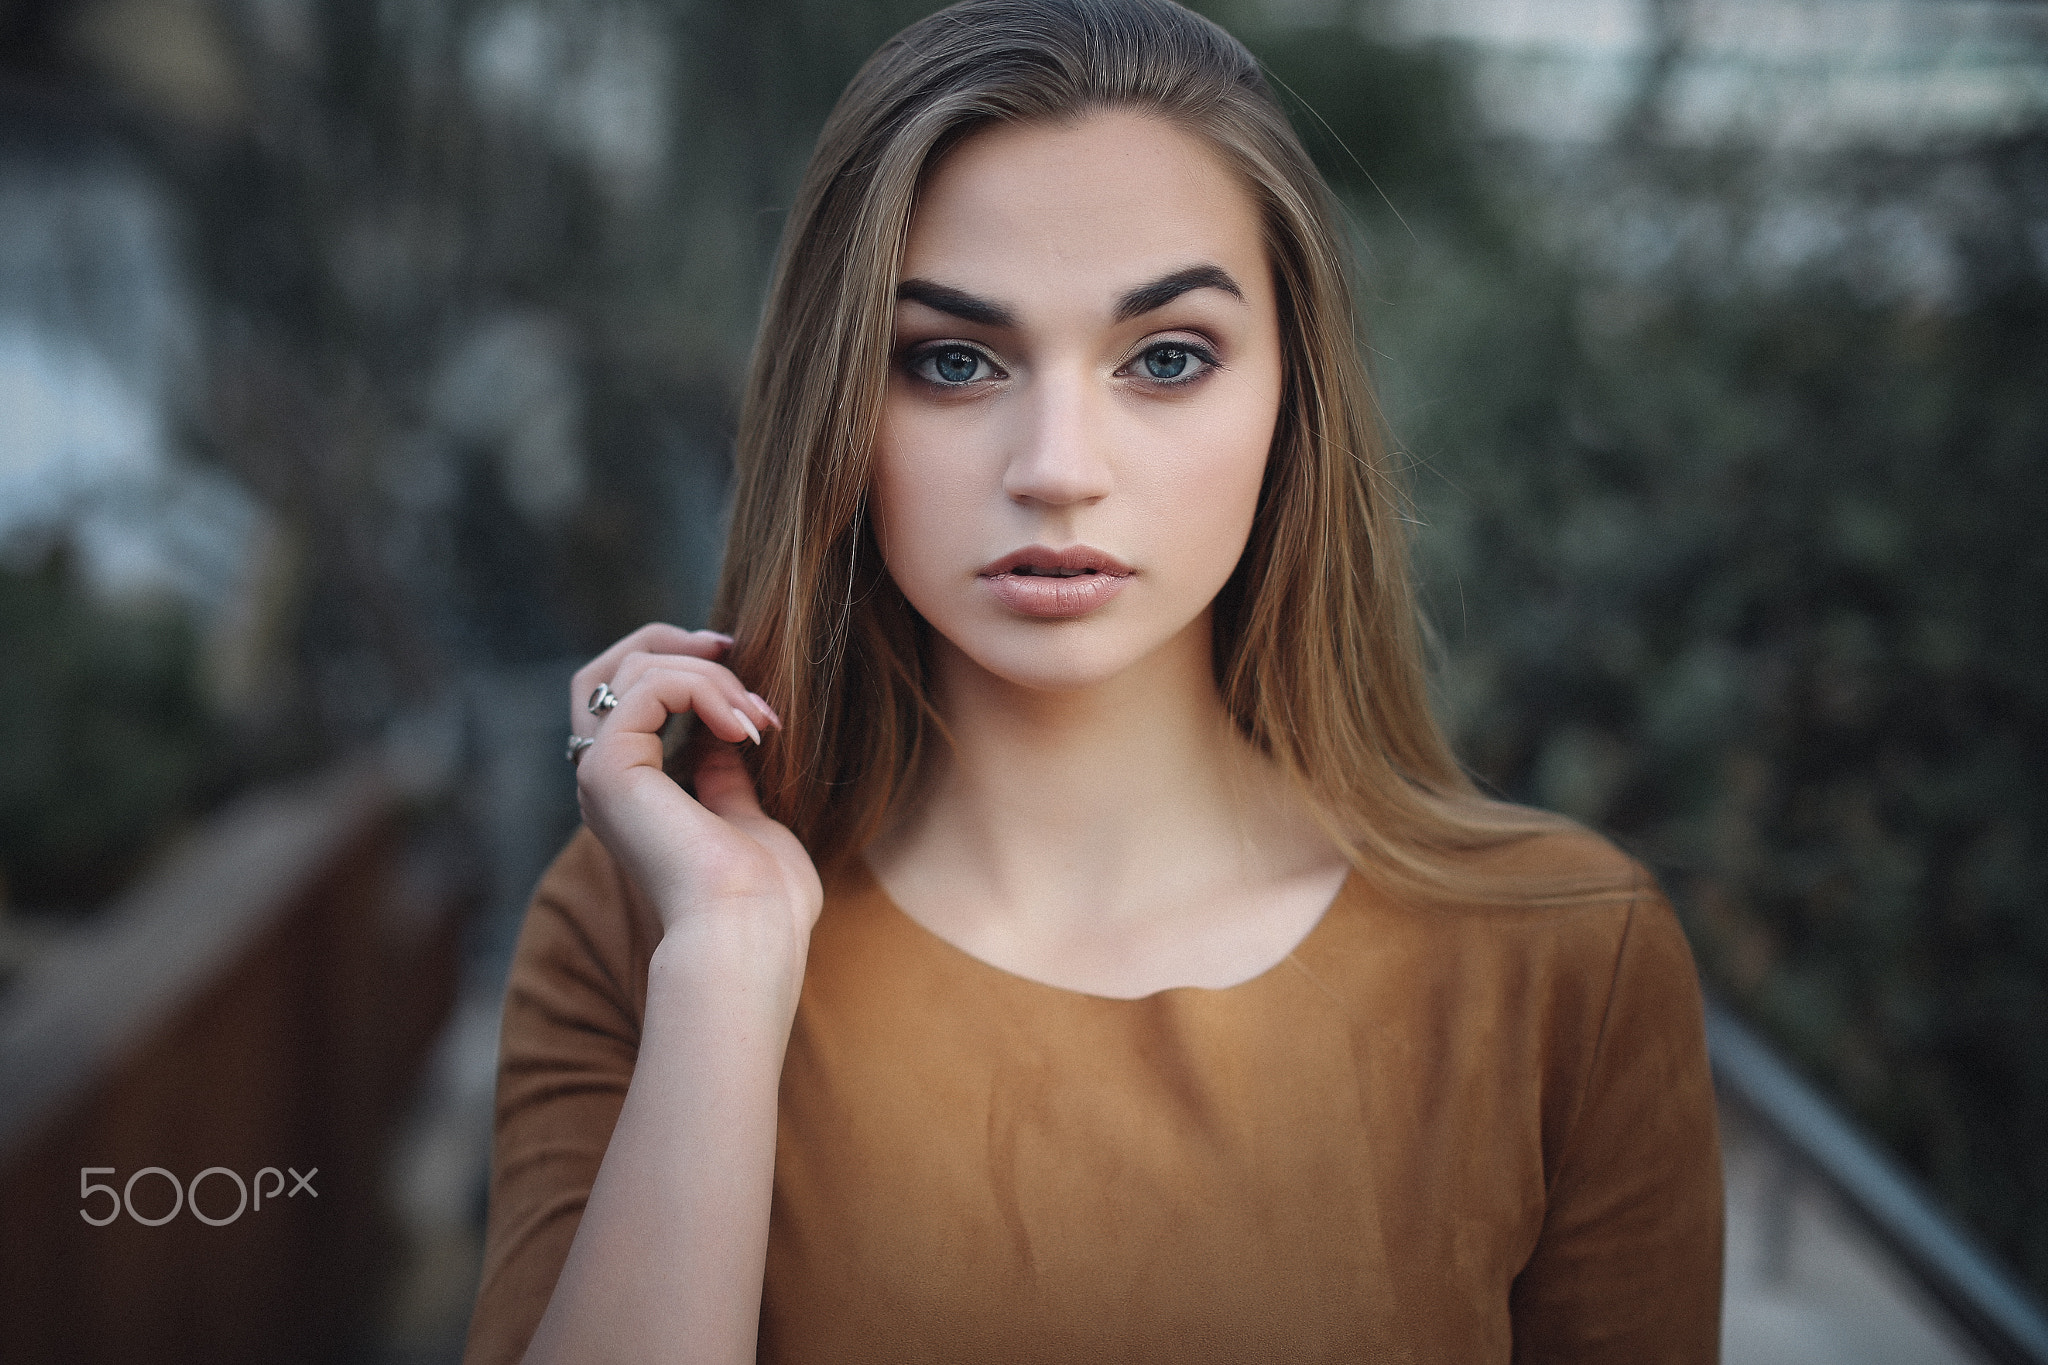 People 2048x1365 women portrait blue eyes depth of field face blonde 500px Shanti Vankerckhove makeup brown clothing one arm up Sonny Bui model parted lips women outdoors watermarked